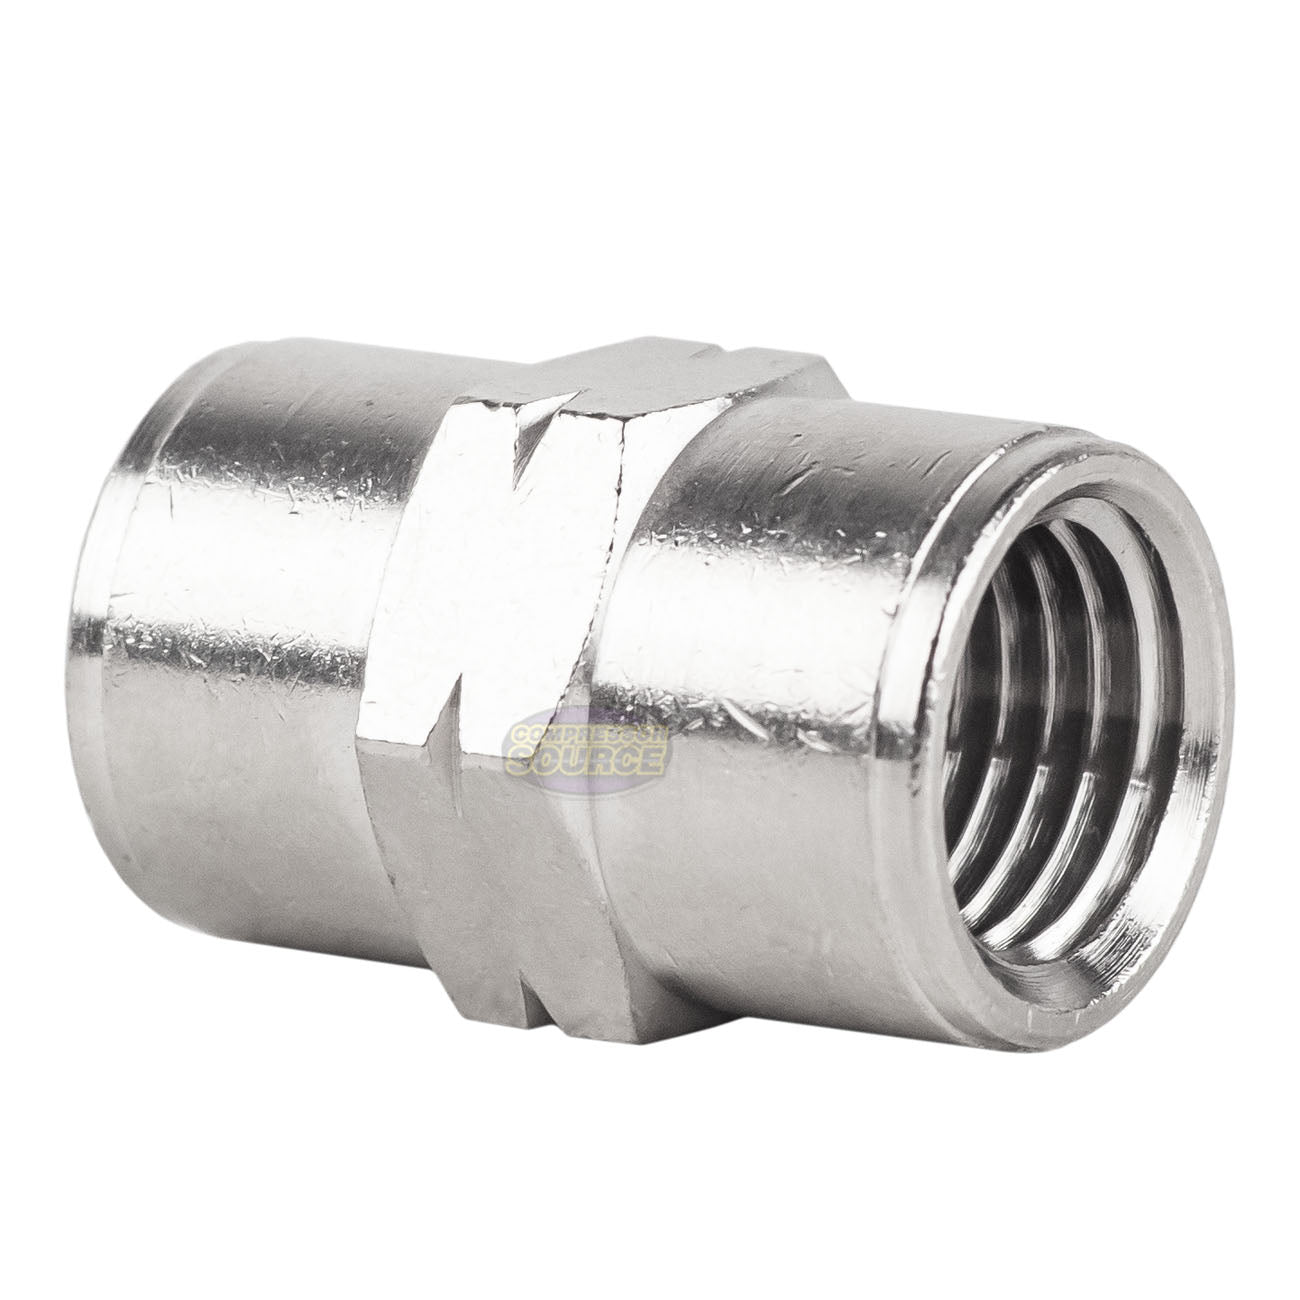 1/4" NPT Female Nickel Plated Brass Pipe Union Adapter Fitting Solid Connector